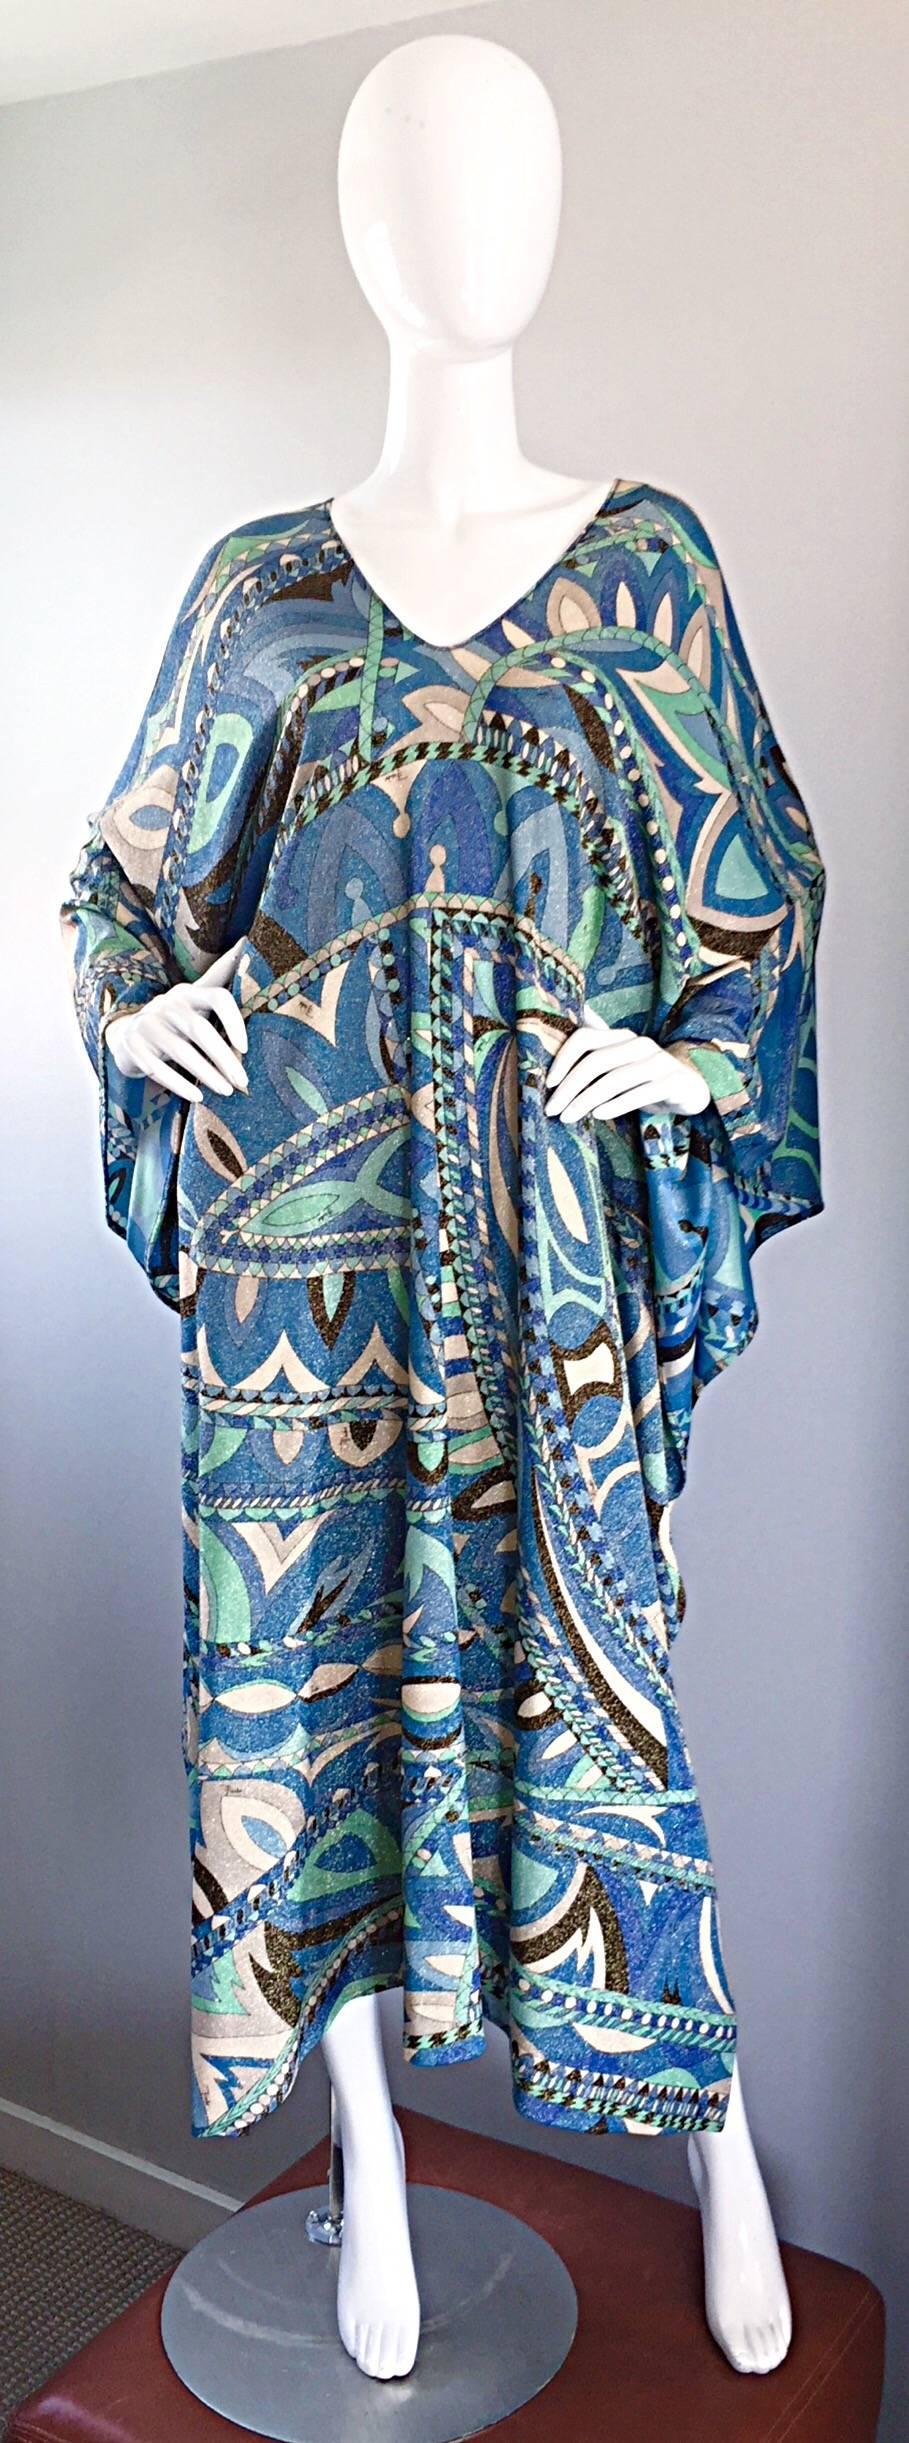 Incredible EMILIO PUCCI metallic kaftan / maxi dress! Features the signature Pucci kaleidoscope print throughout in vibrant metallic blues and greens. Pucci signature throughout. Grecian Goddess fit that drapes in all the right places. Flattering